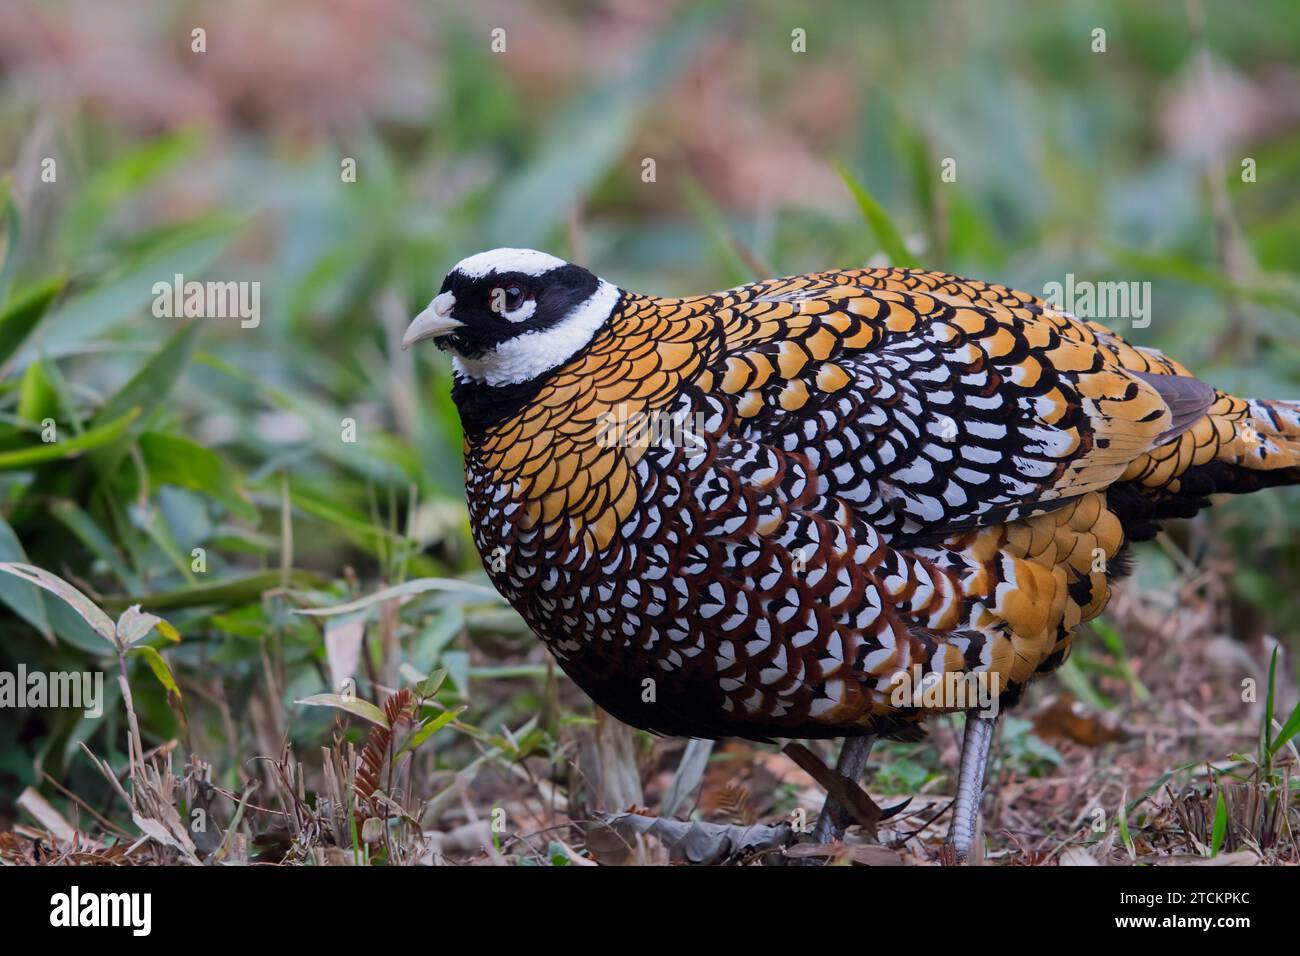 Adult Male Reeves's Pheasant Stock Photo